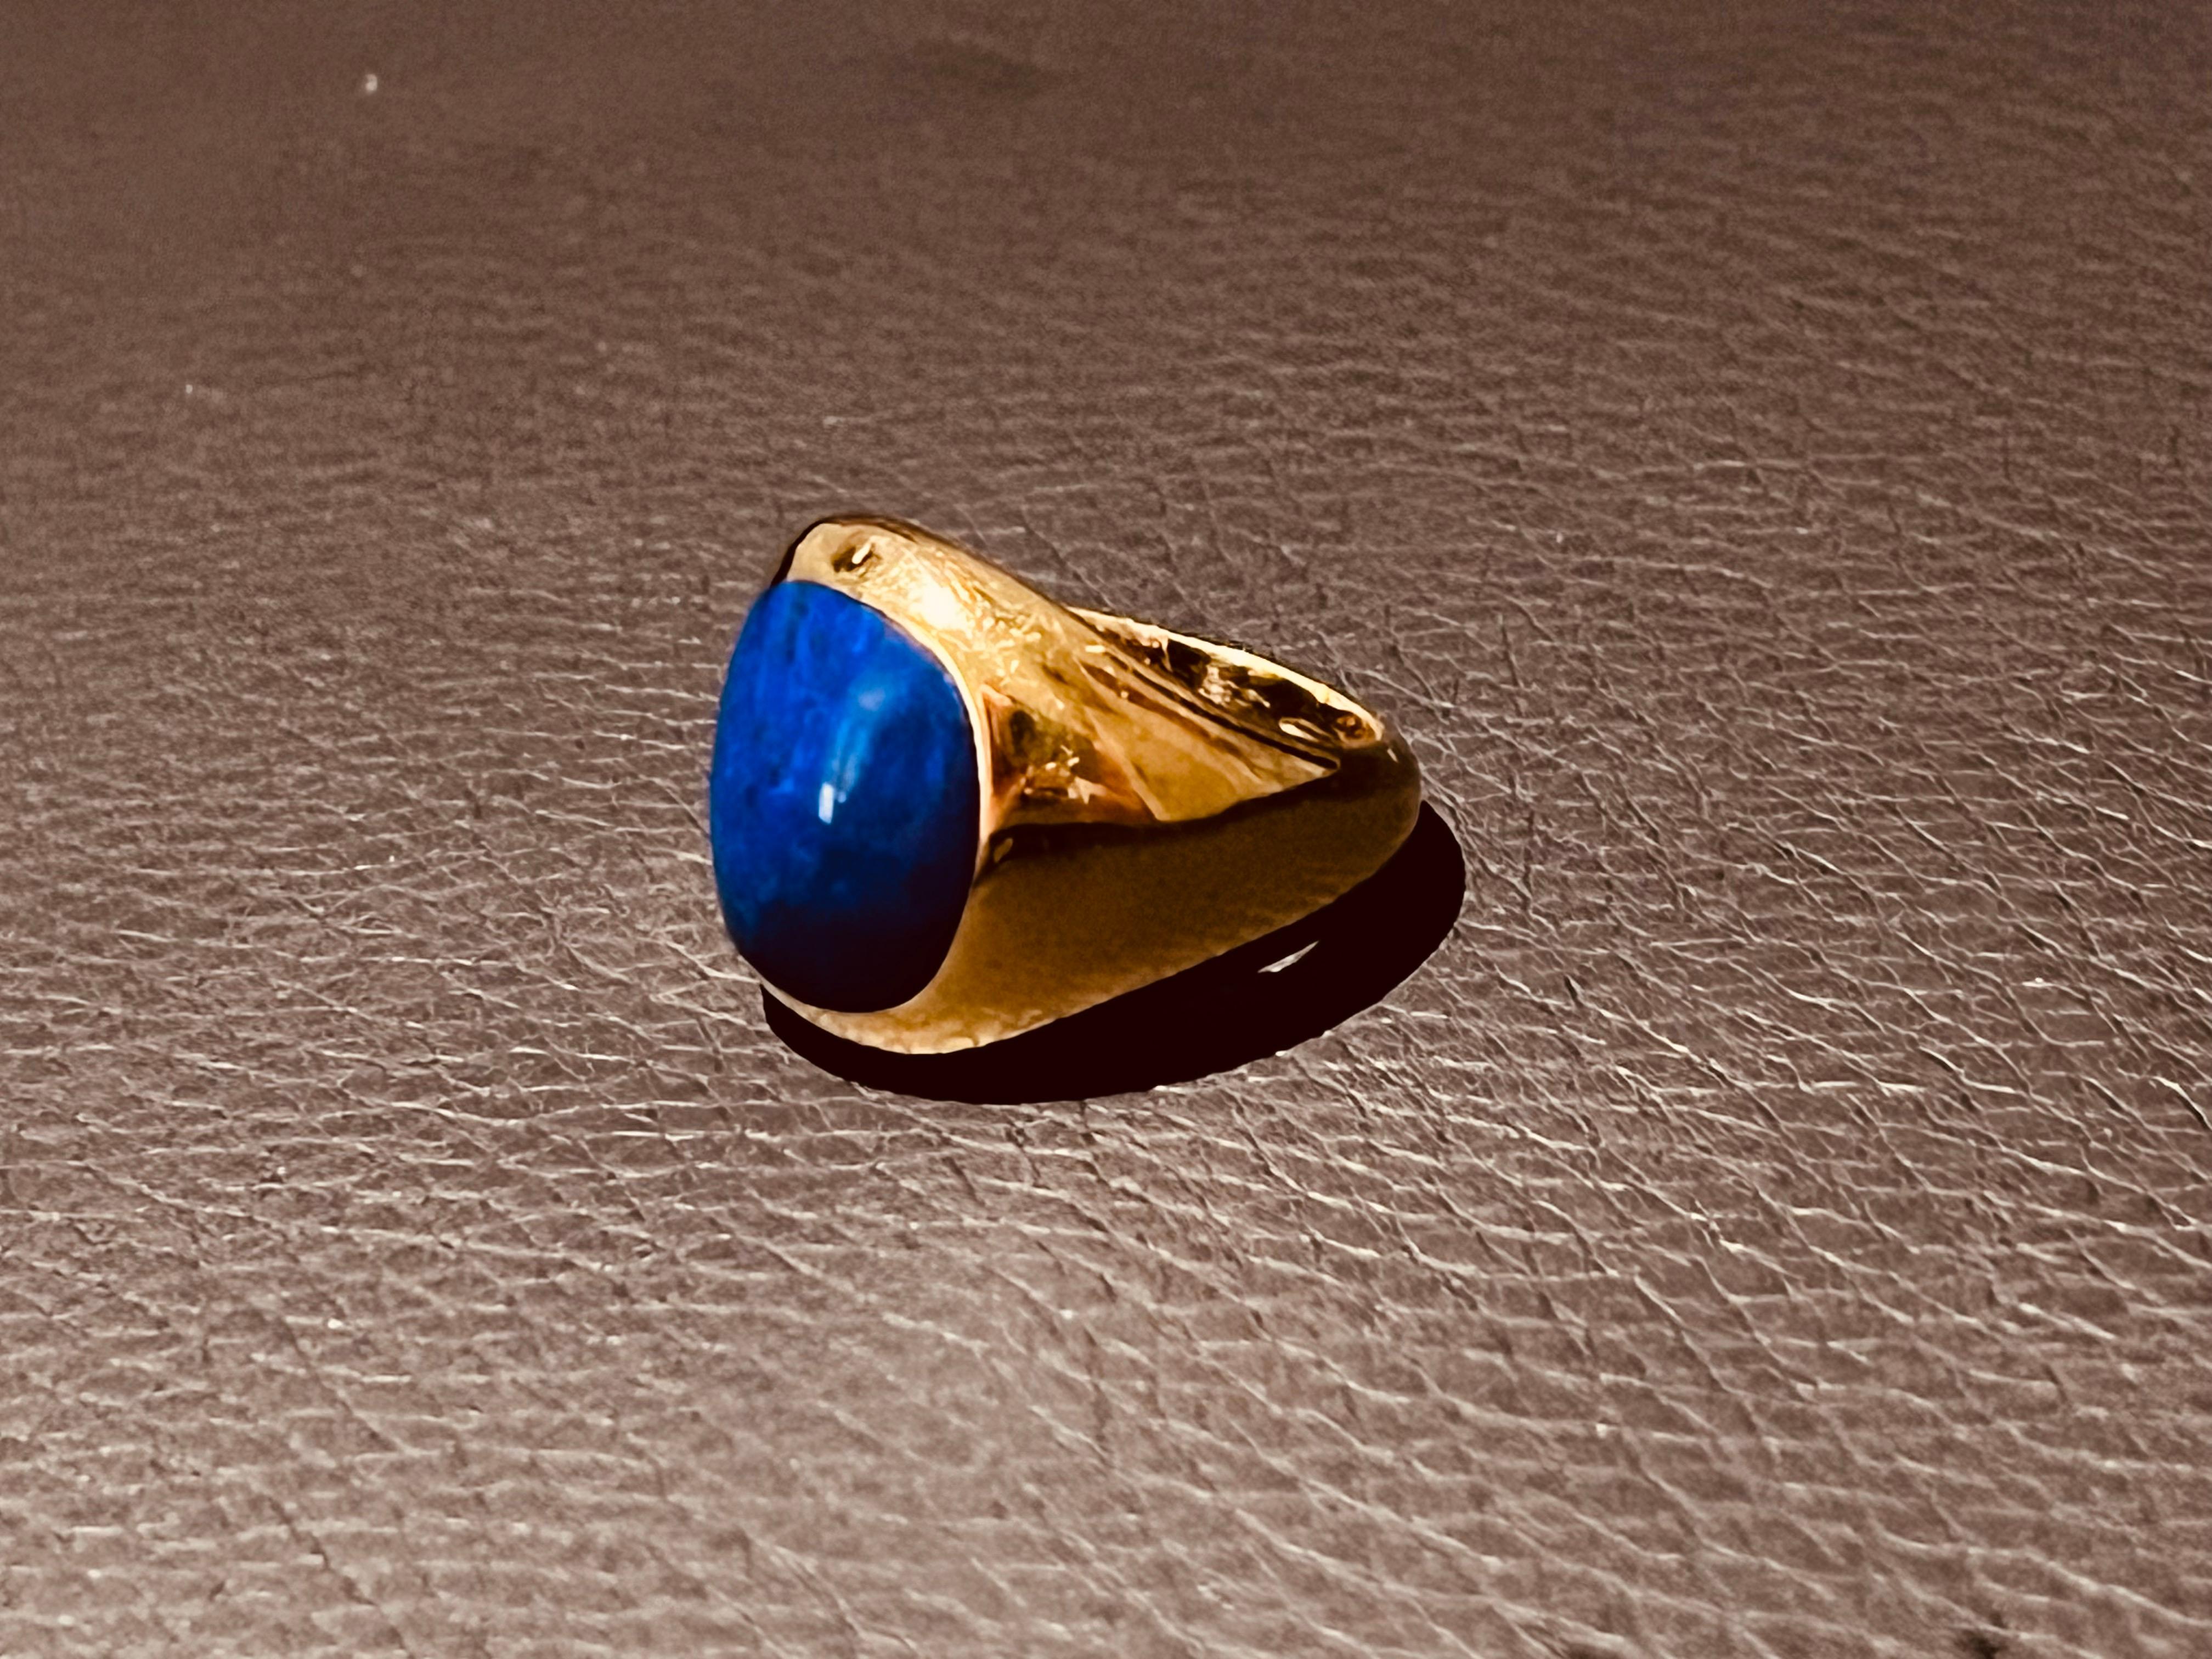 A Cushion Shaped Lapis Lazuli Mounted In a 18 Carat Yellow Gold Signet Ring  For Sale 2